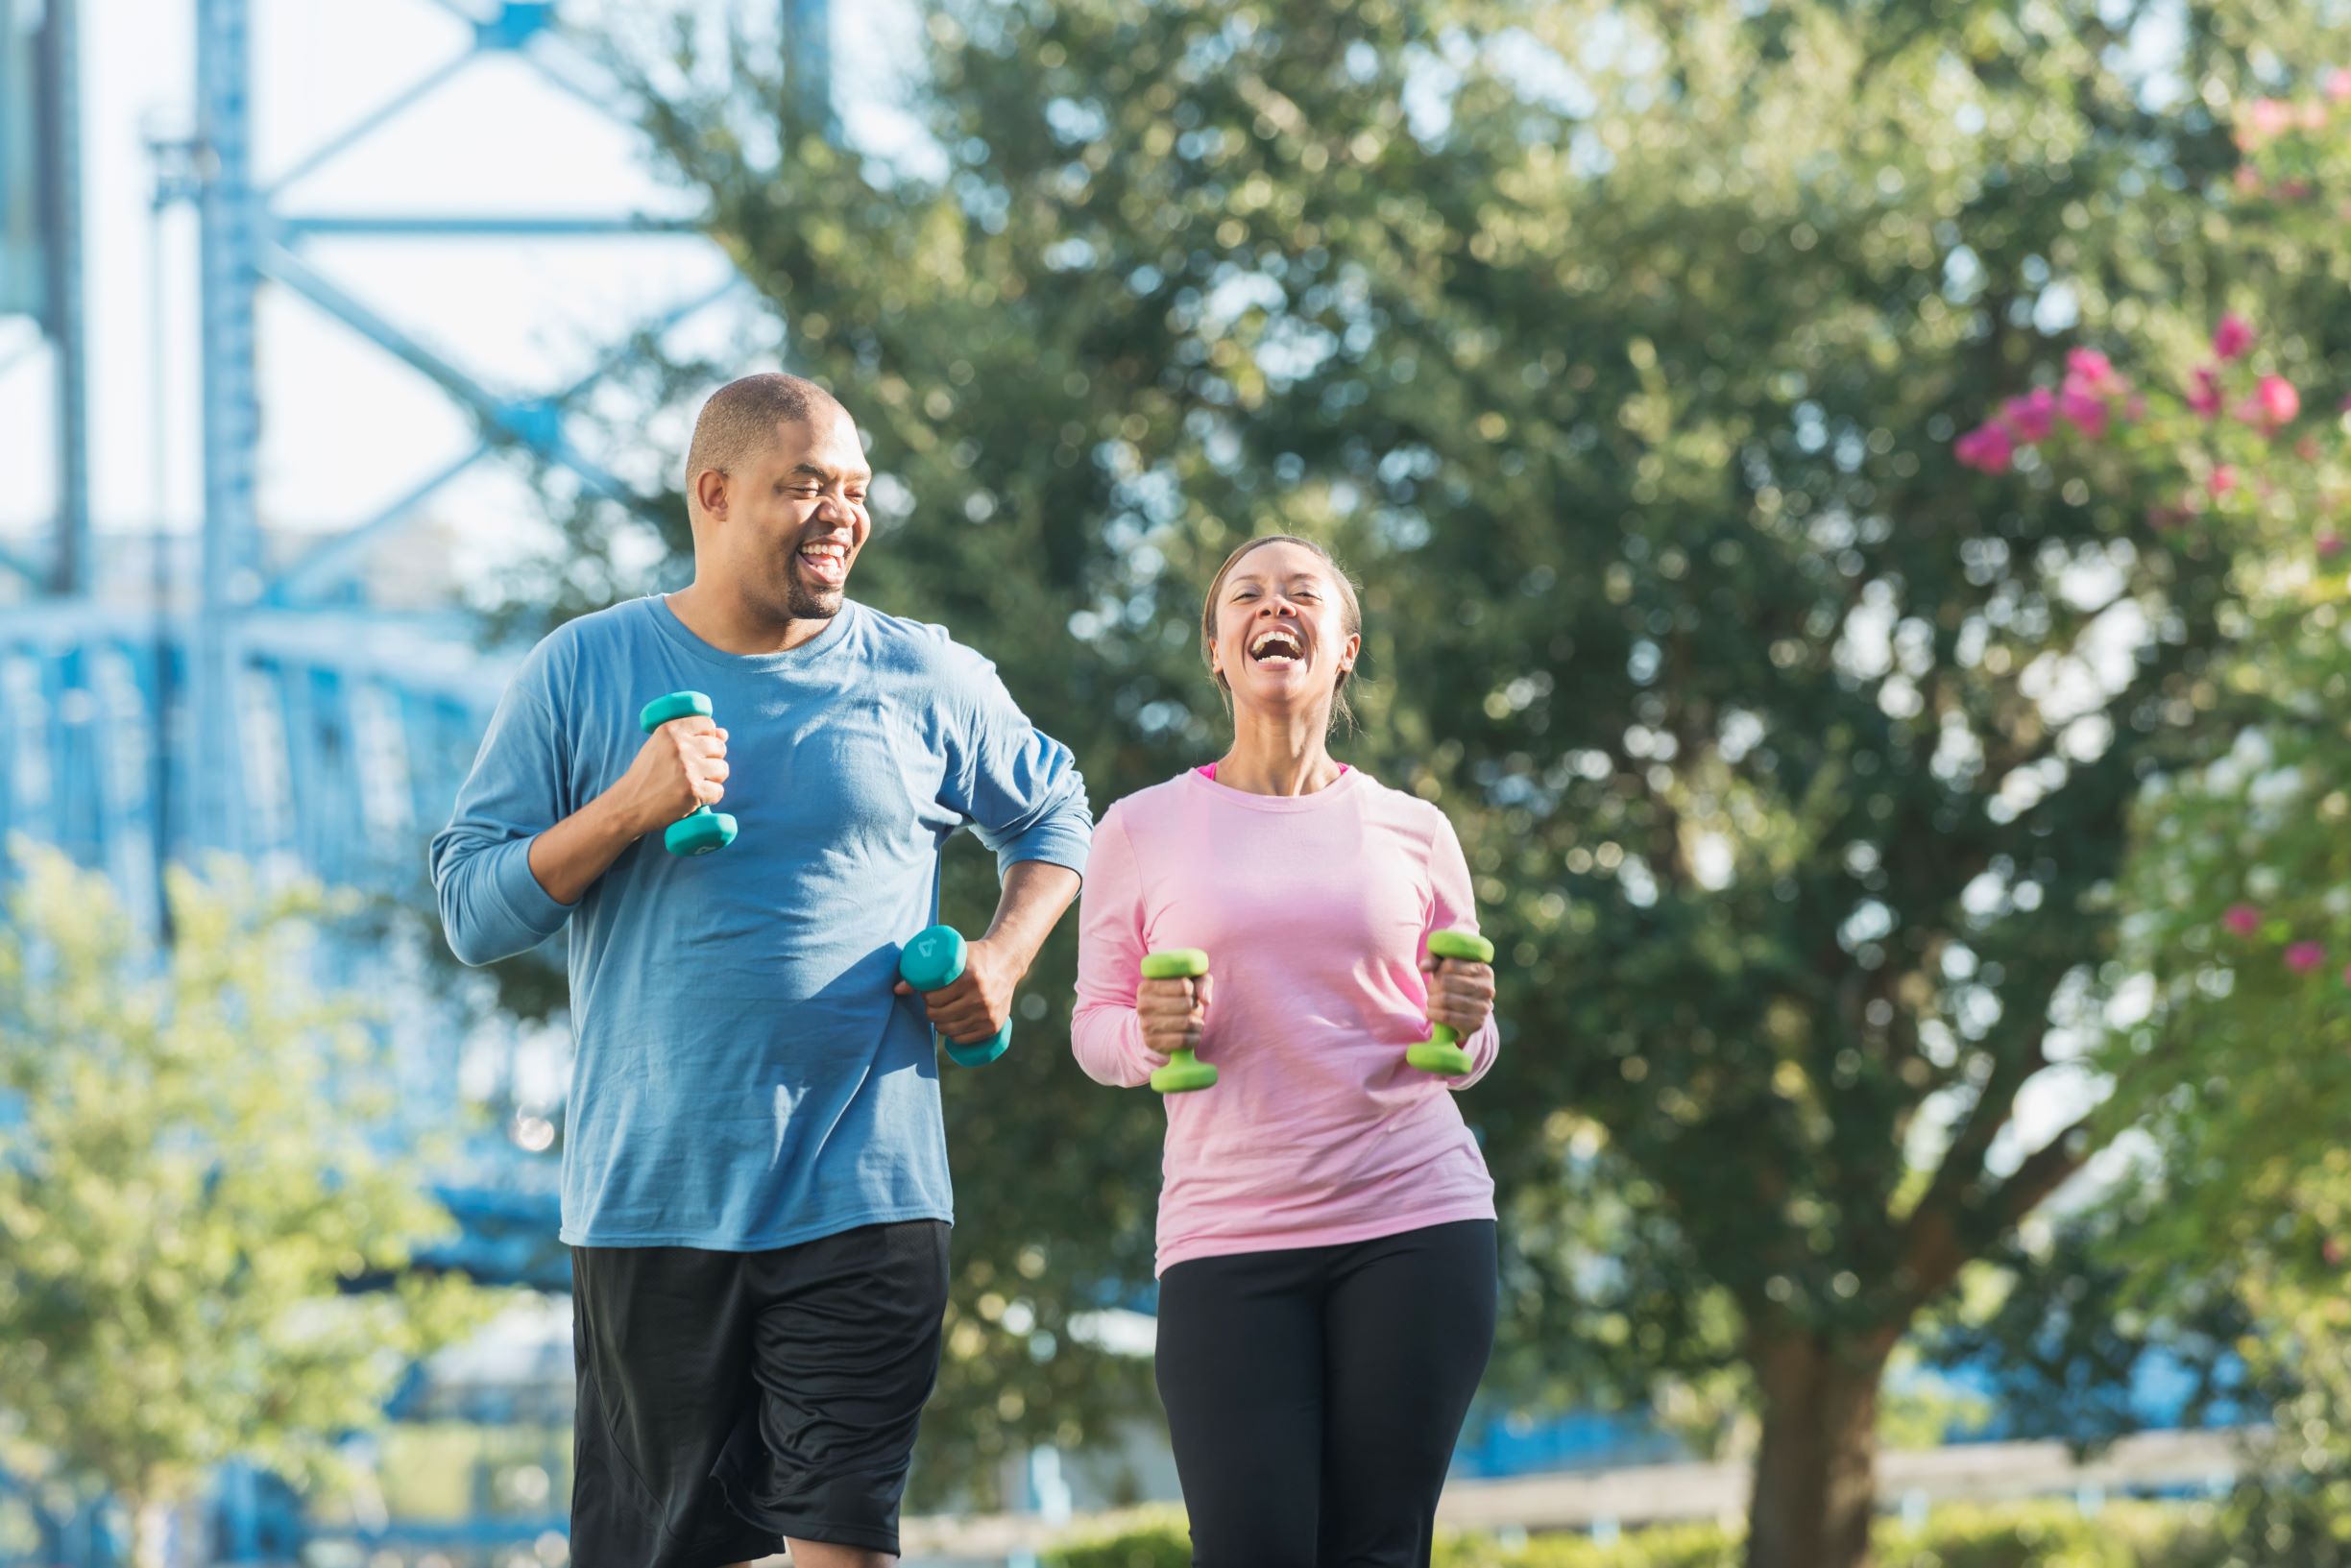 A couple walk with dumbbells in each hand while laughing. Carrying dumbbells during your walk gives you the added benefit of building up those arm muscles. Having someone you love walking with you as well makes it all that much better.